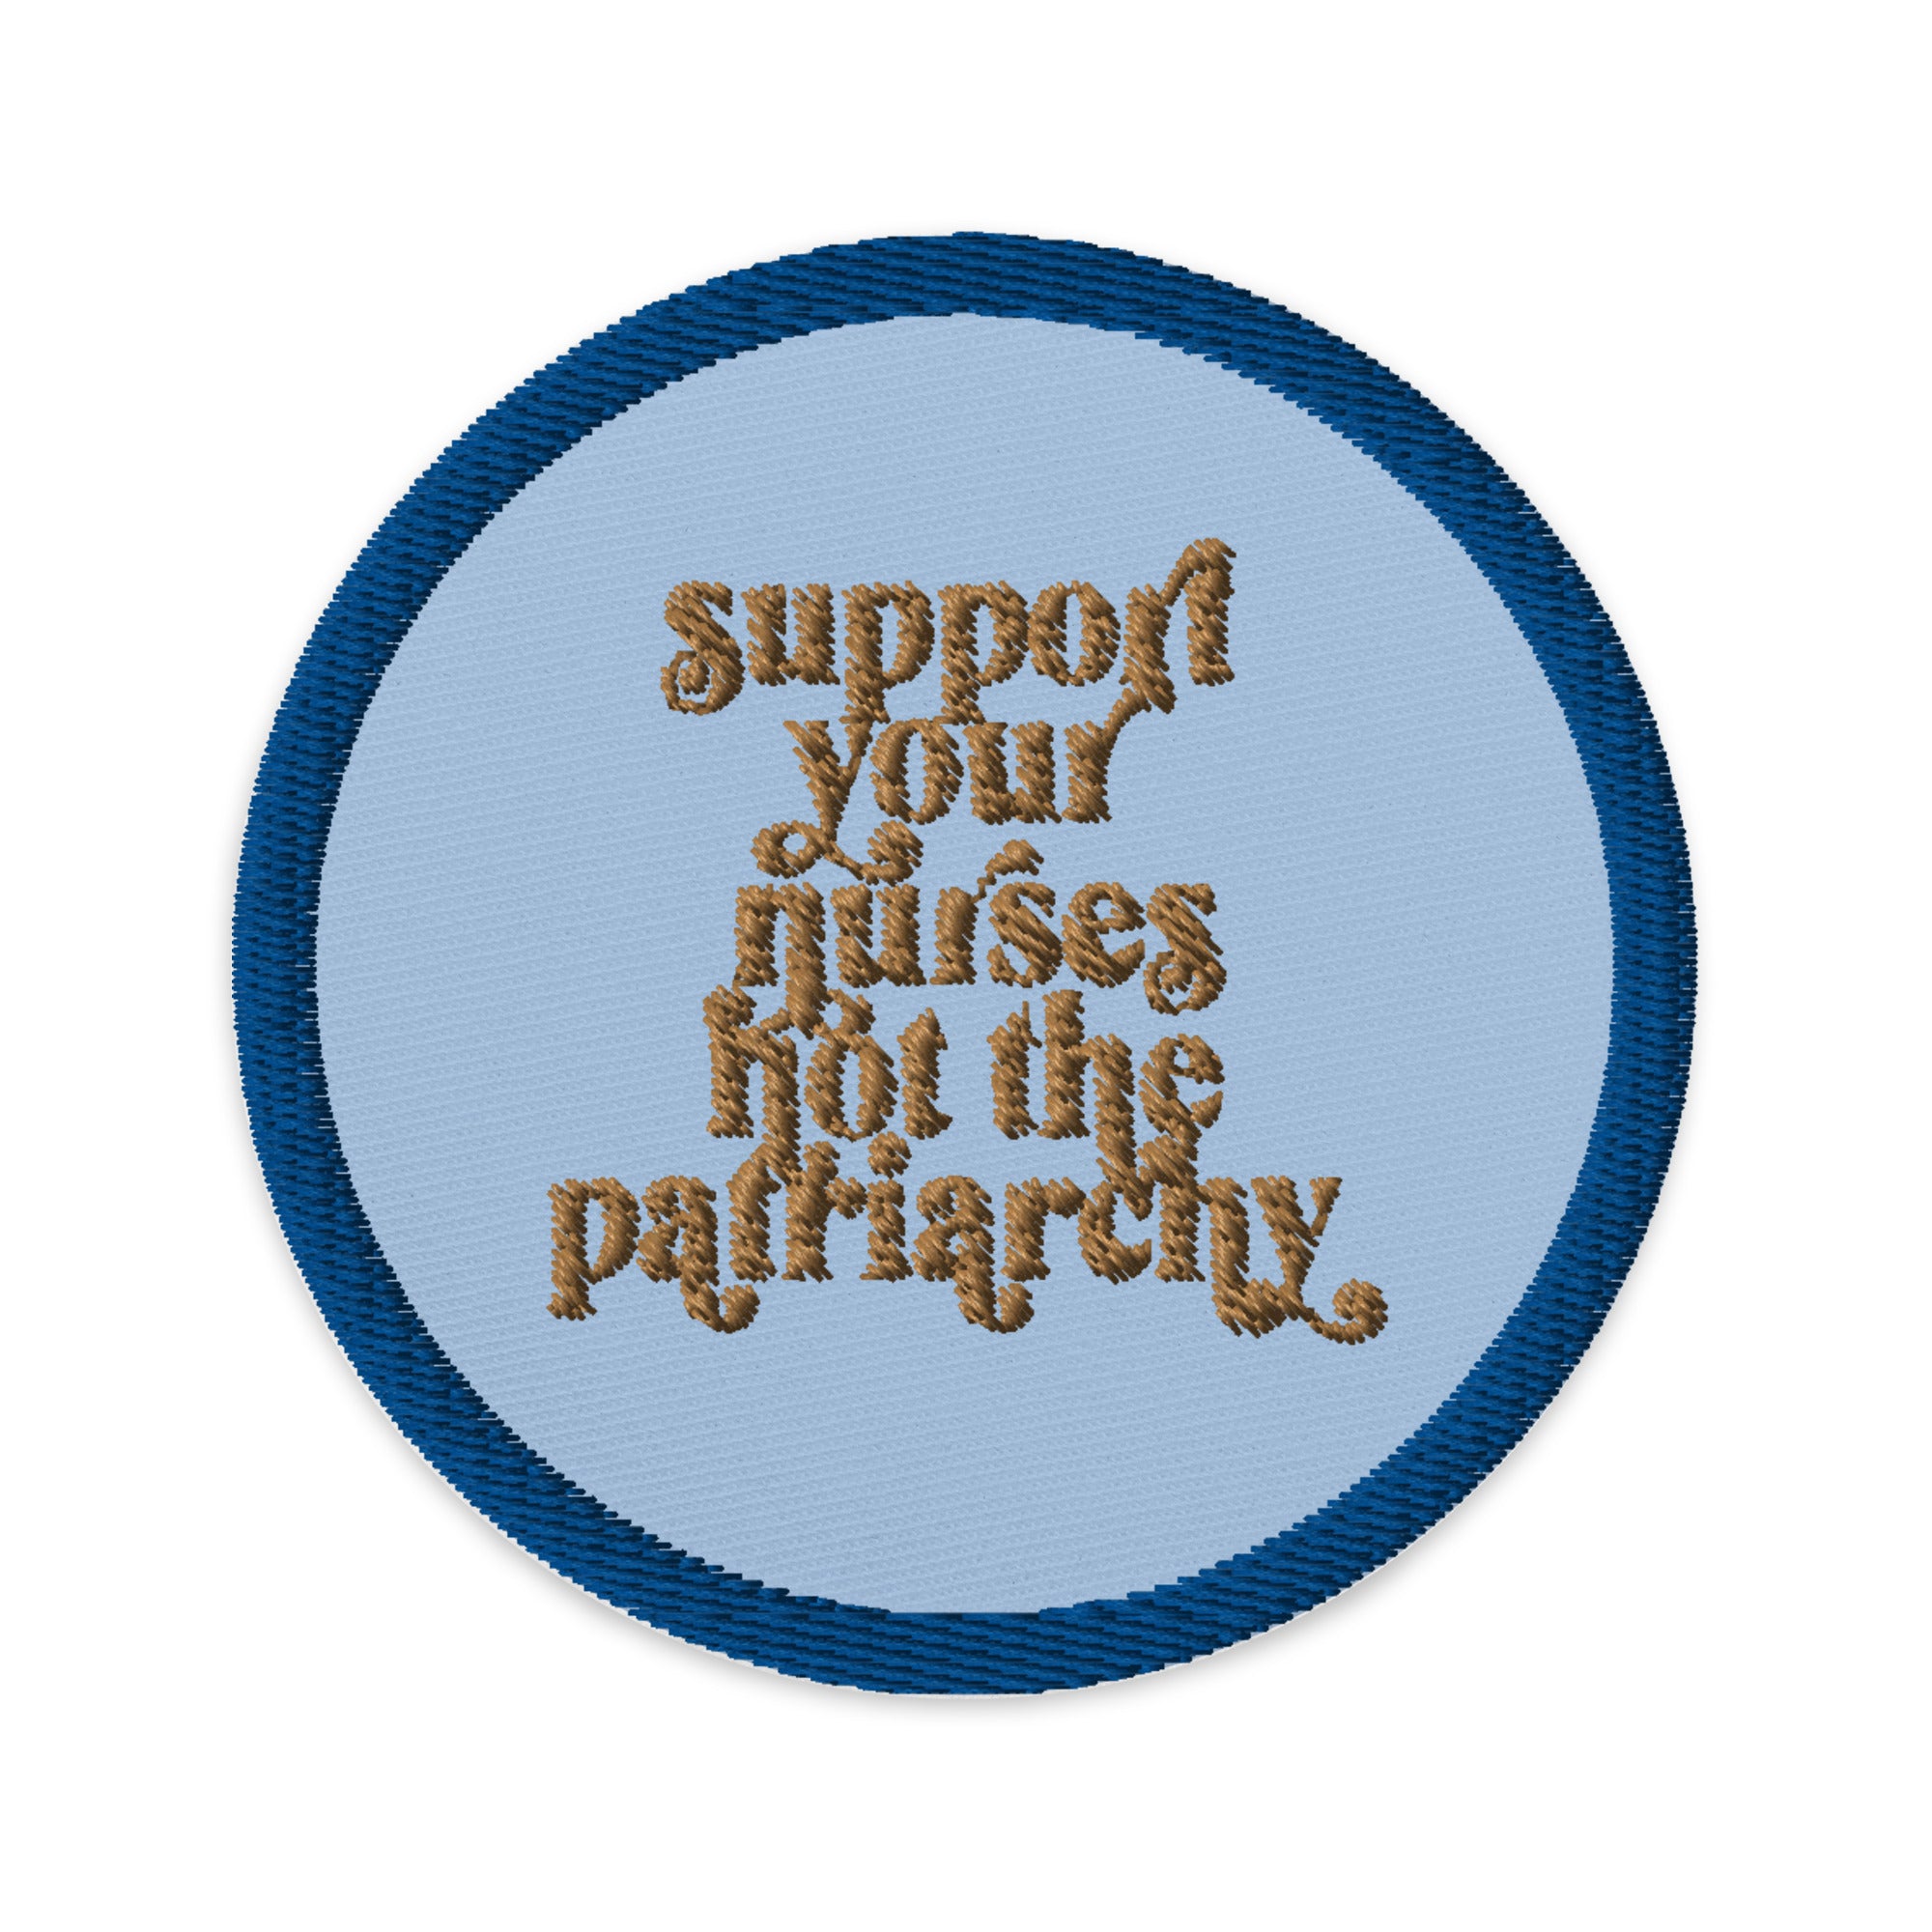 Support Your Nurses Patch